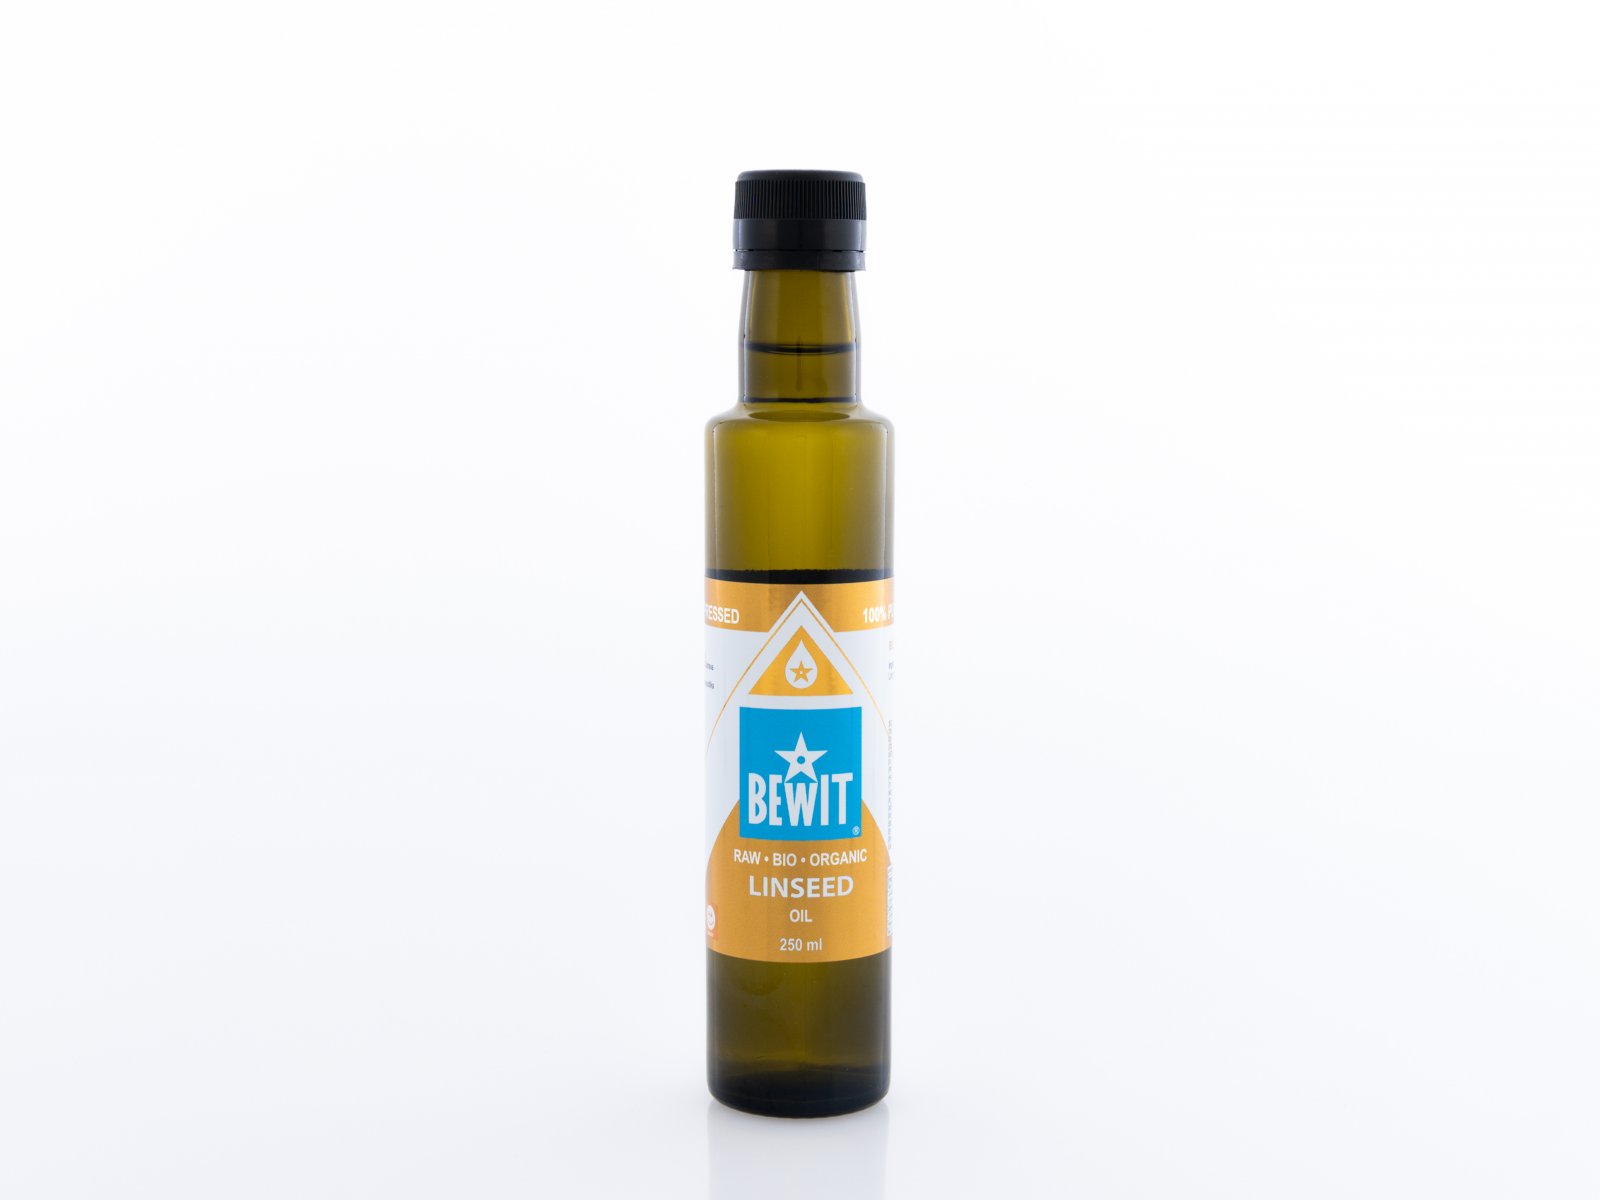 BEWIT Linseed oil ORGANIC  - A fresh Bio quality oil - 2